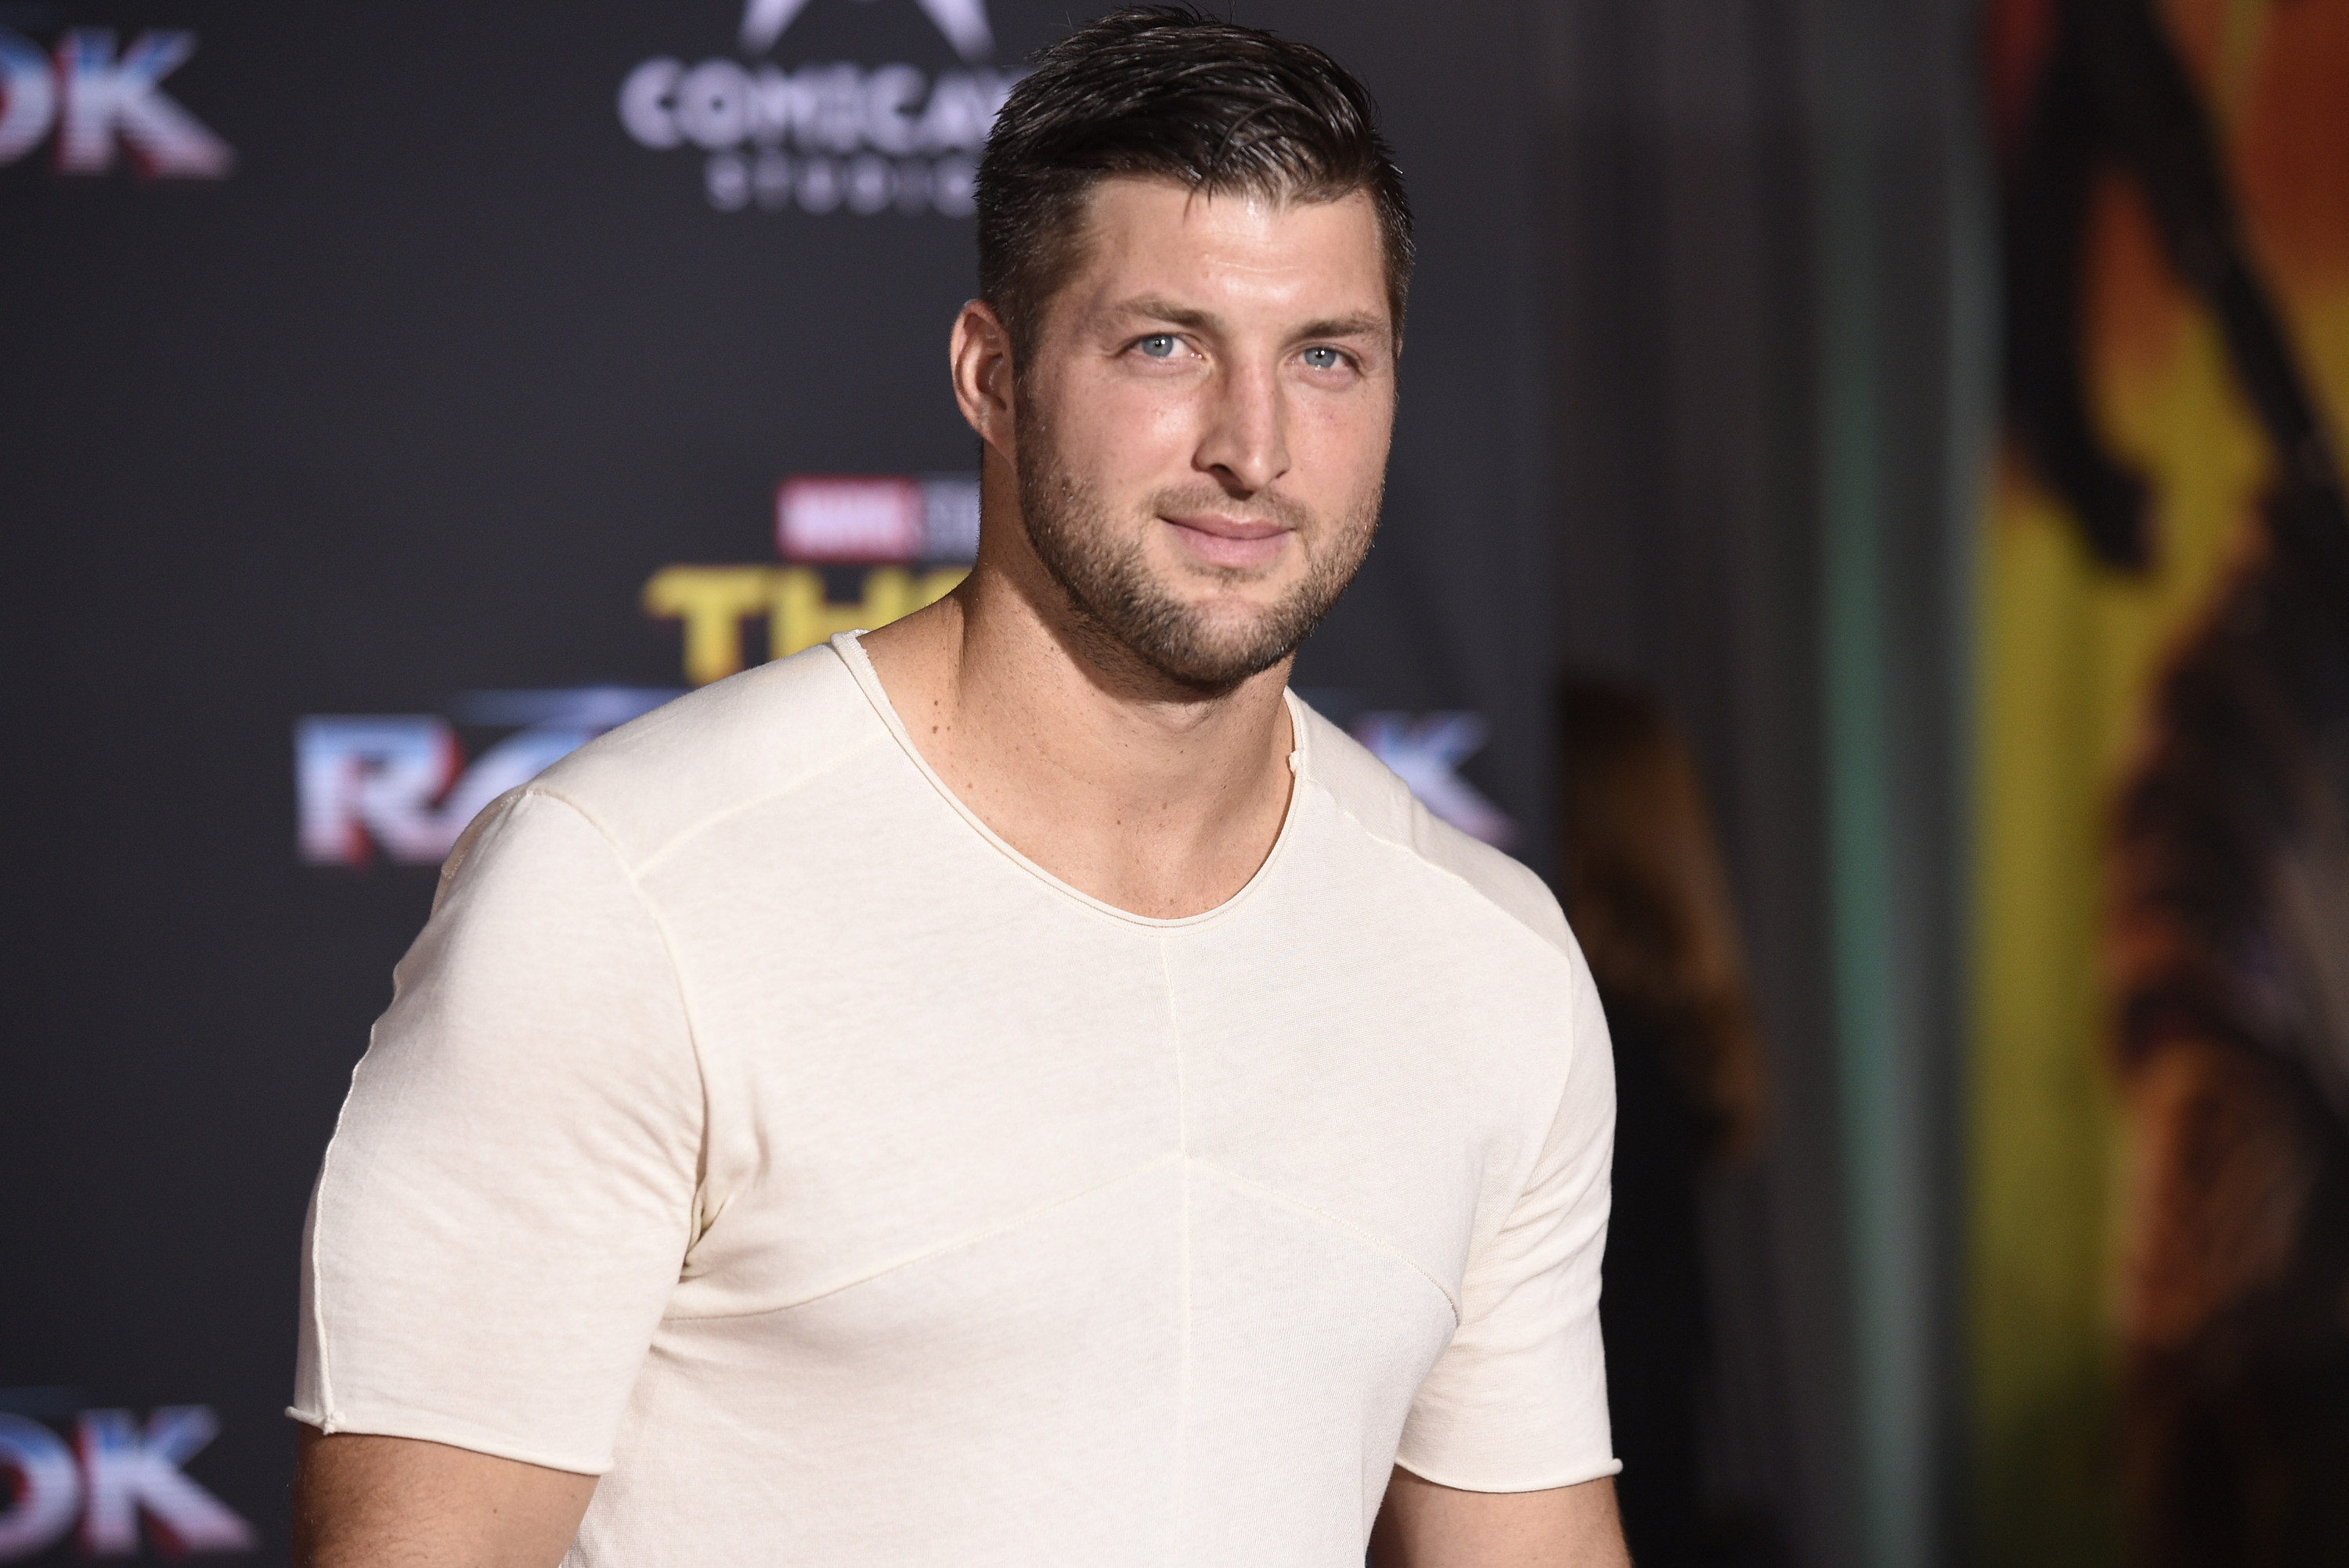 Baseball fans trolling the Mets for another Tim Tebow Spring Training invite